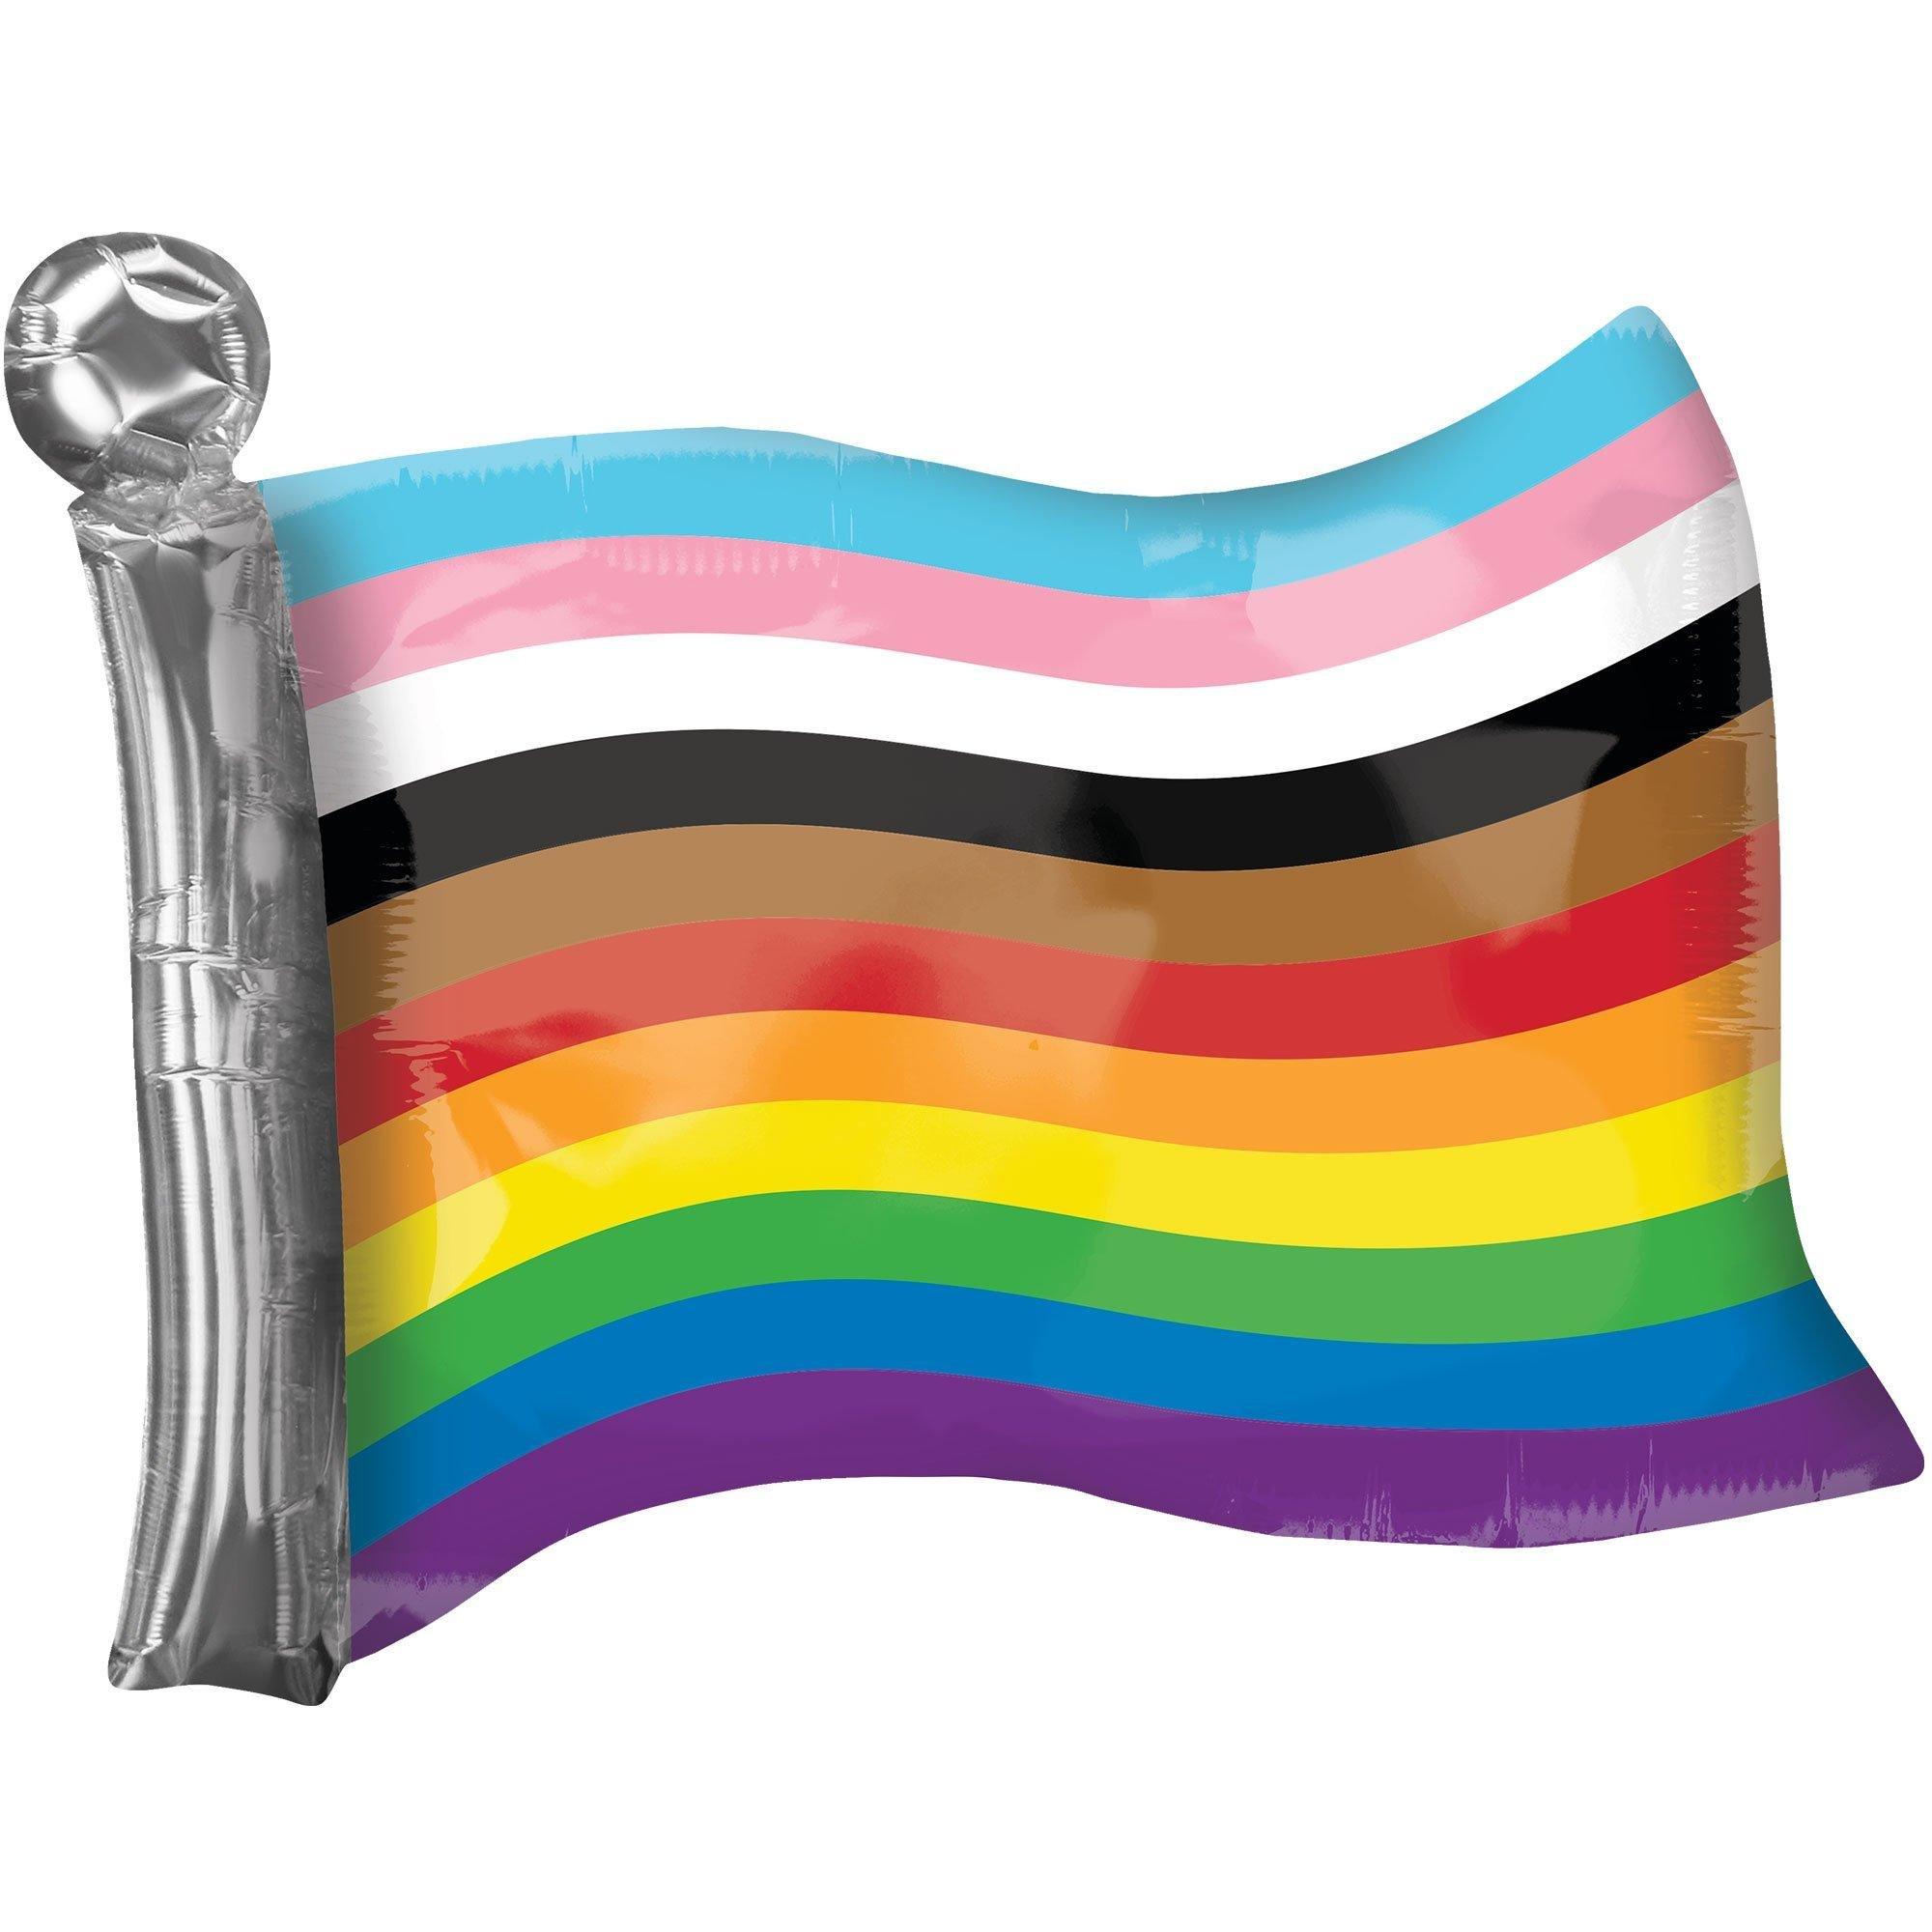 Pan Hearts & Pride Flag Foil Balloon Bouquet with Balloon Weight, 14pc